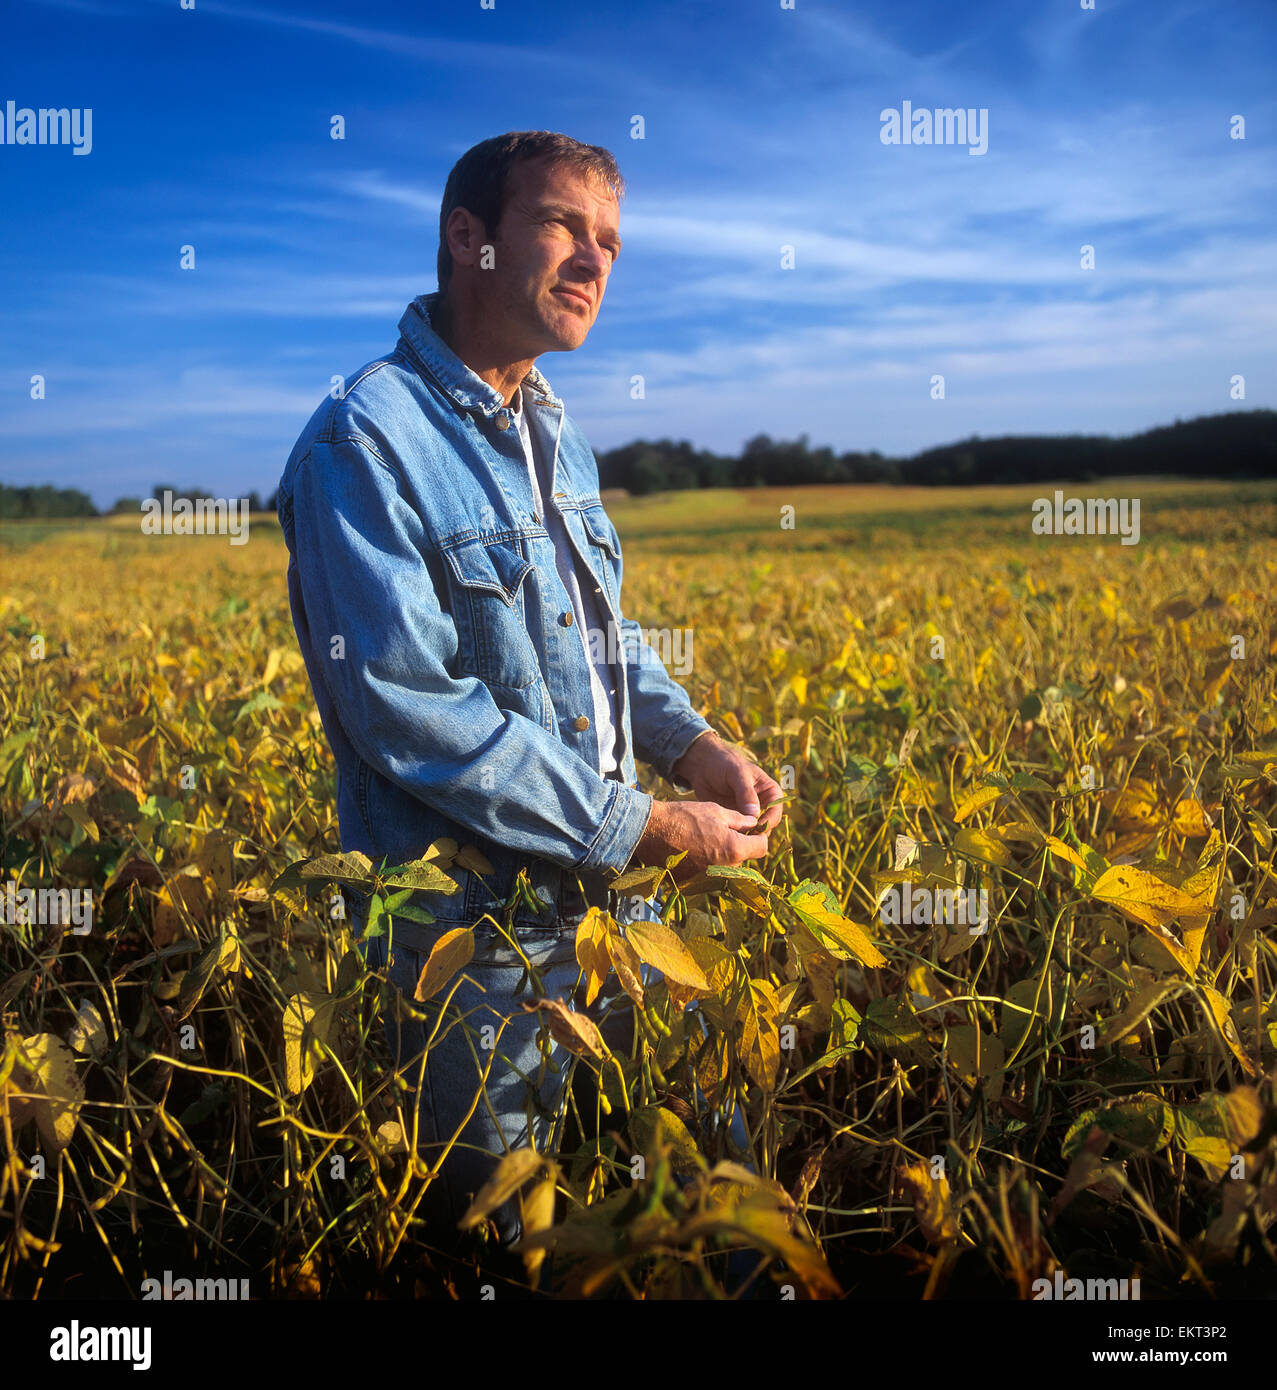 Agriculture - A farmer looks out across his maturing soybean crop, inspecting it Stock Photo